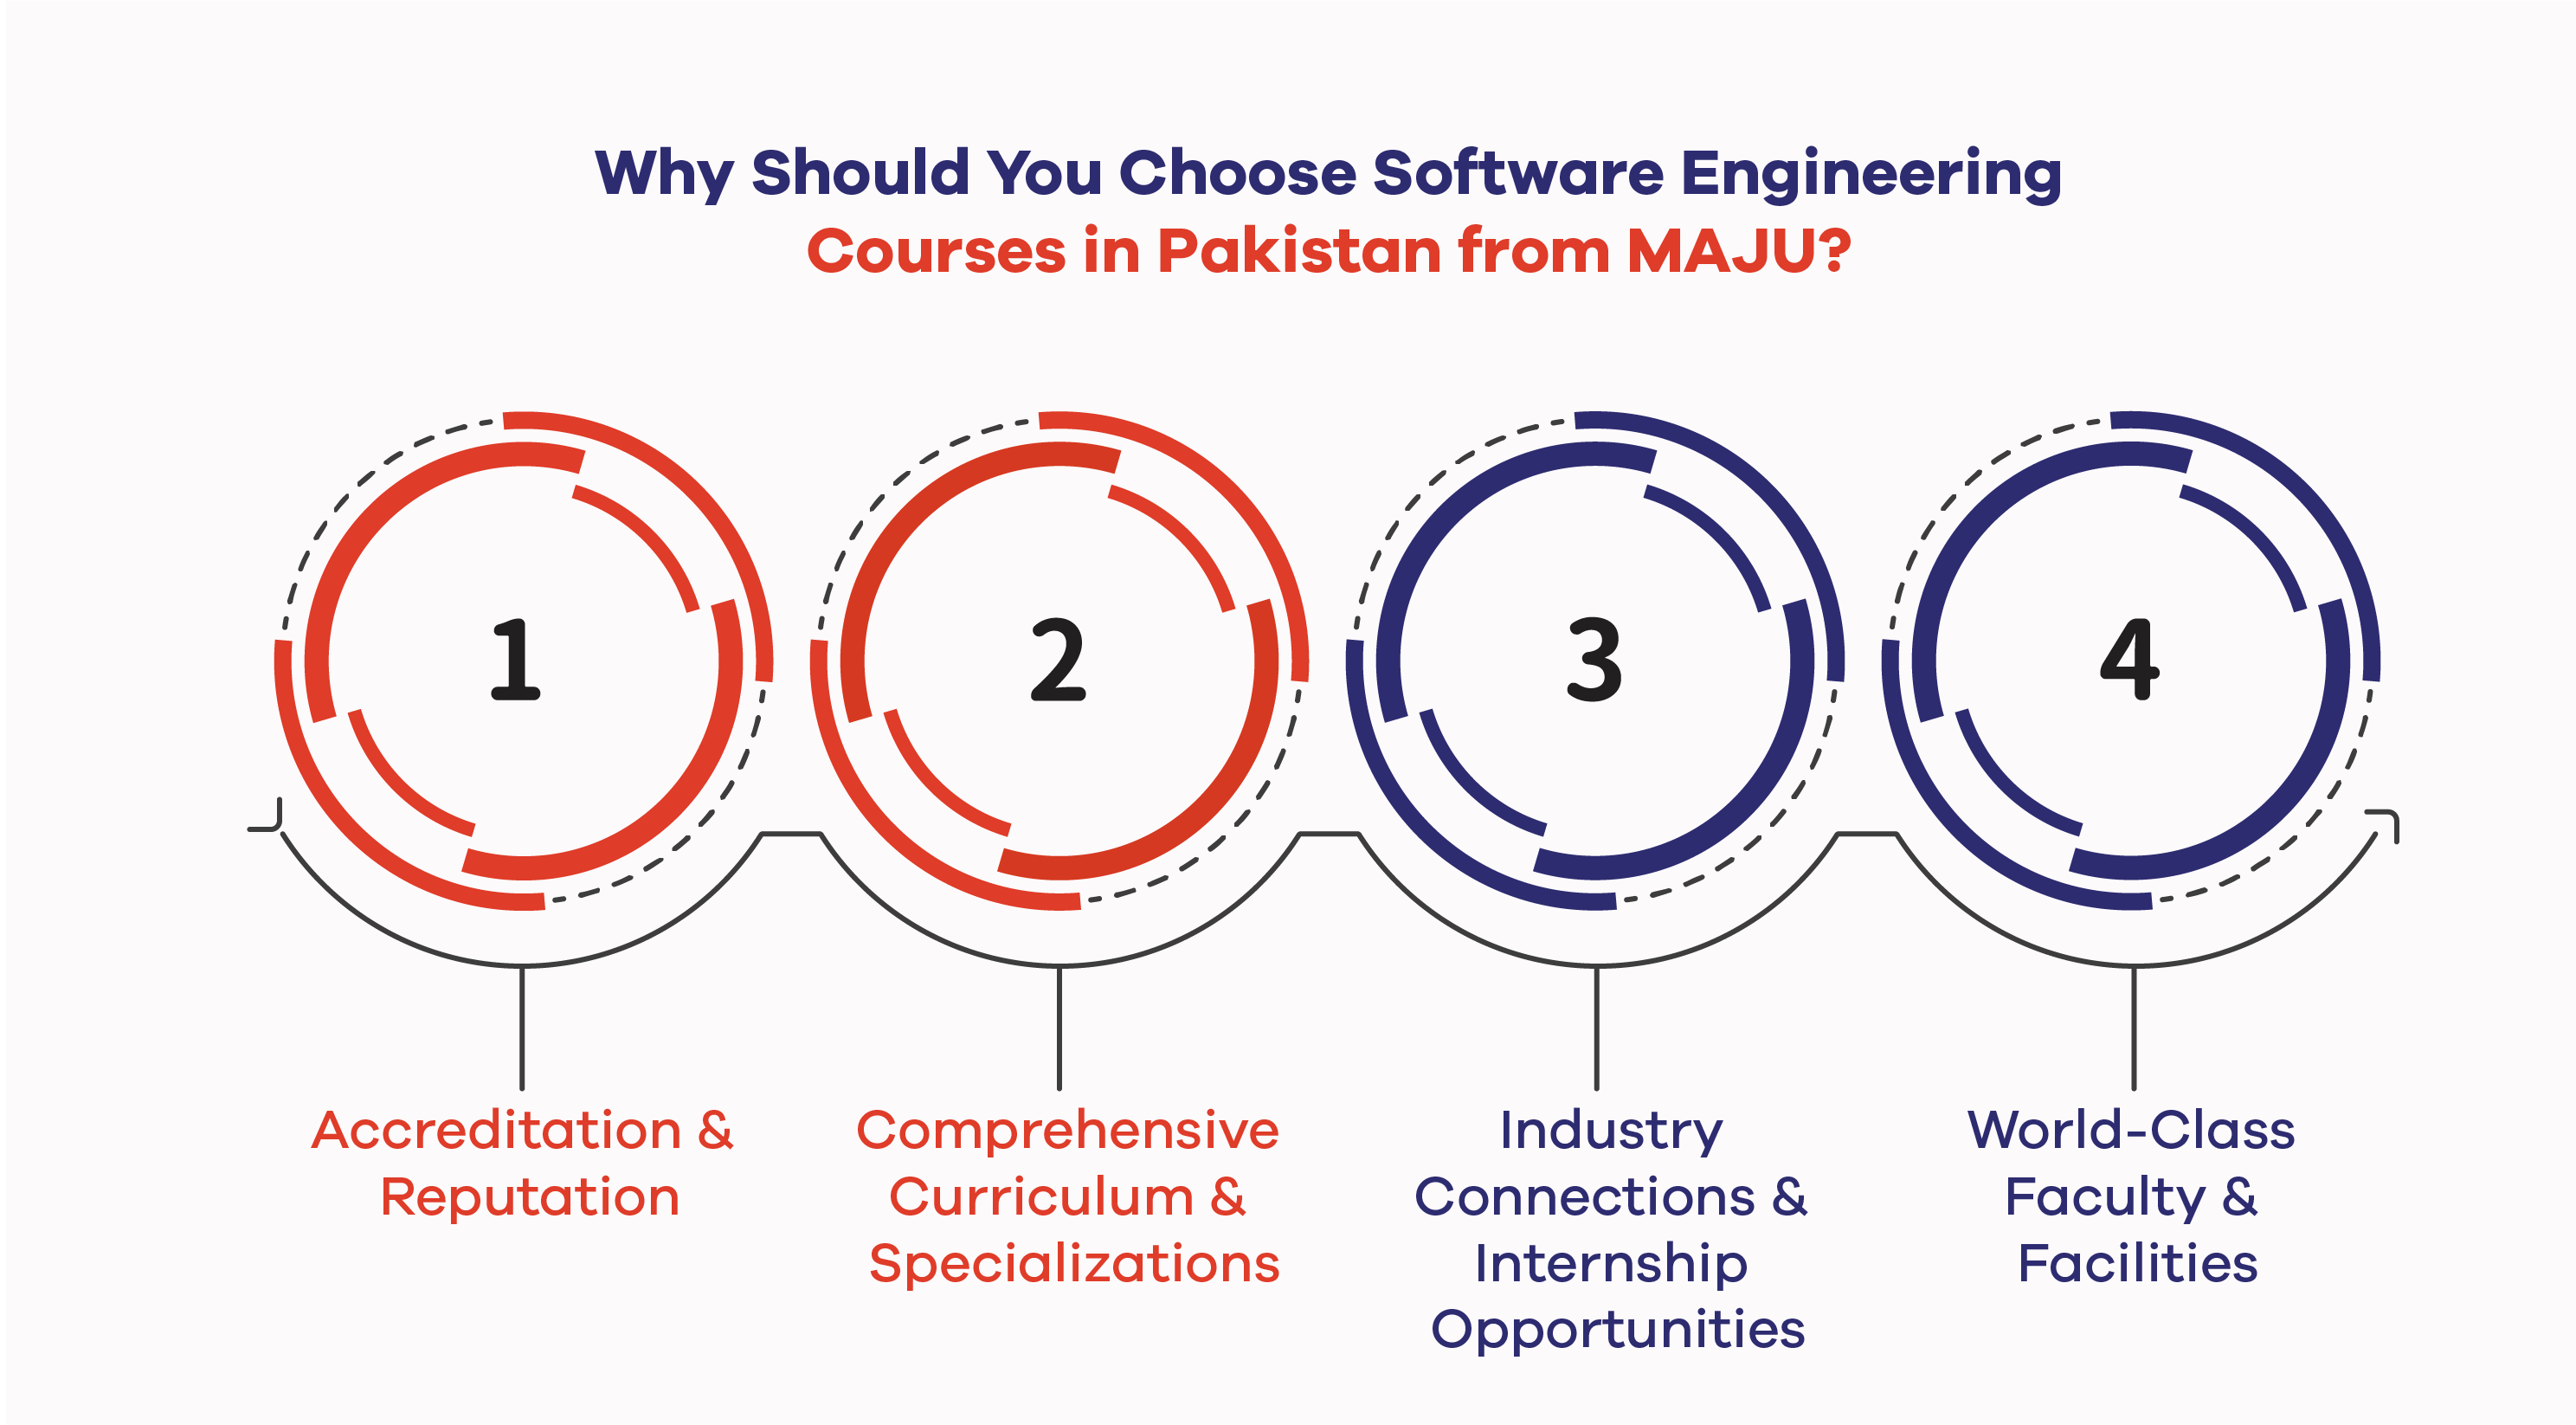 Why Should You Choose Software Engineering Courses in Pakistan from MAJU? 